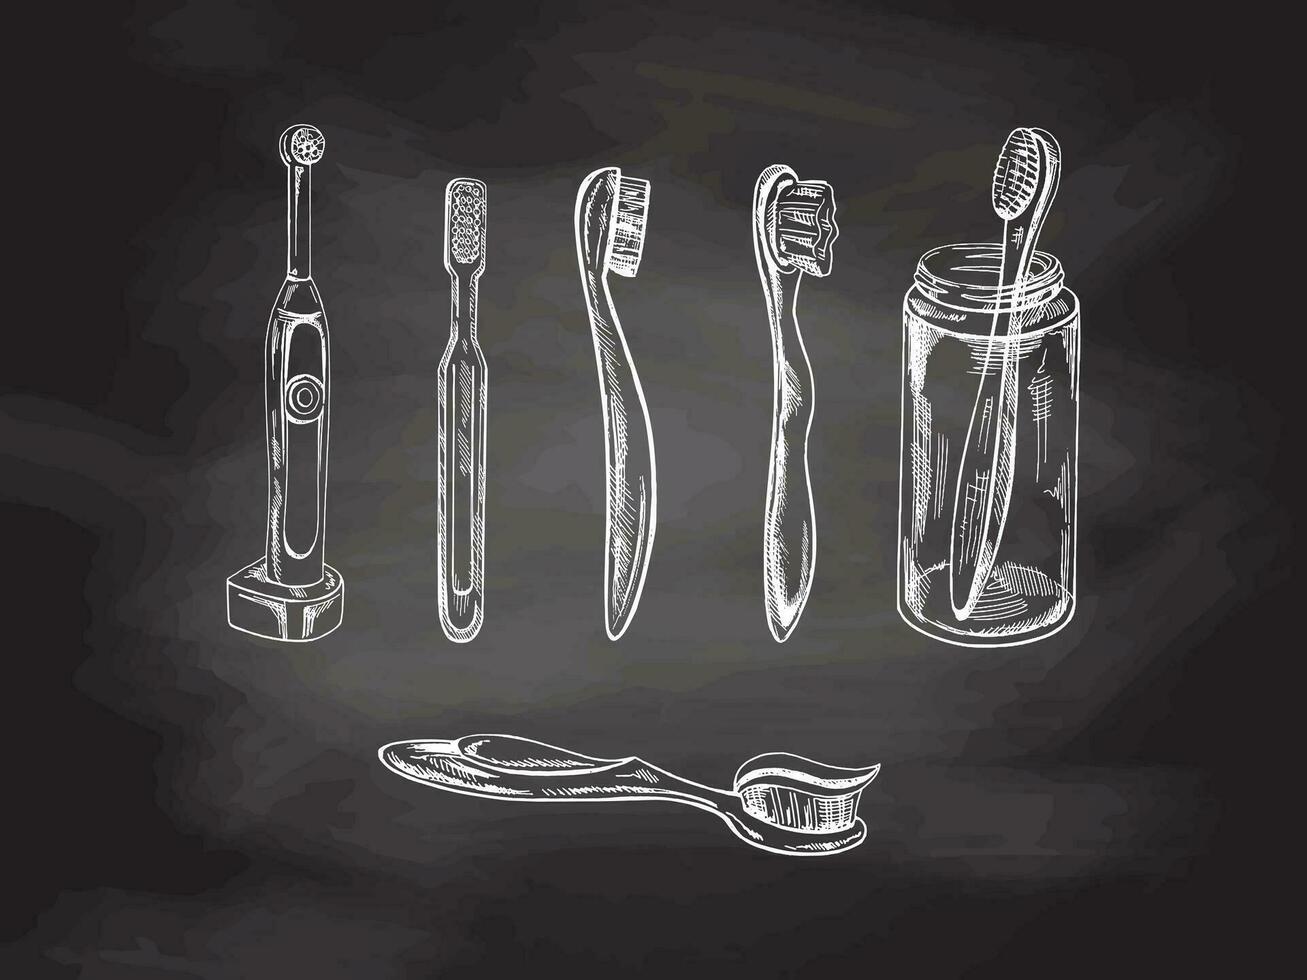 Stomatology hand drawn set on chalkboard background. Toothache treatment. Toothbrushes of different types, electric toothbrush. Dental care, dental instruments. vector